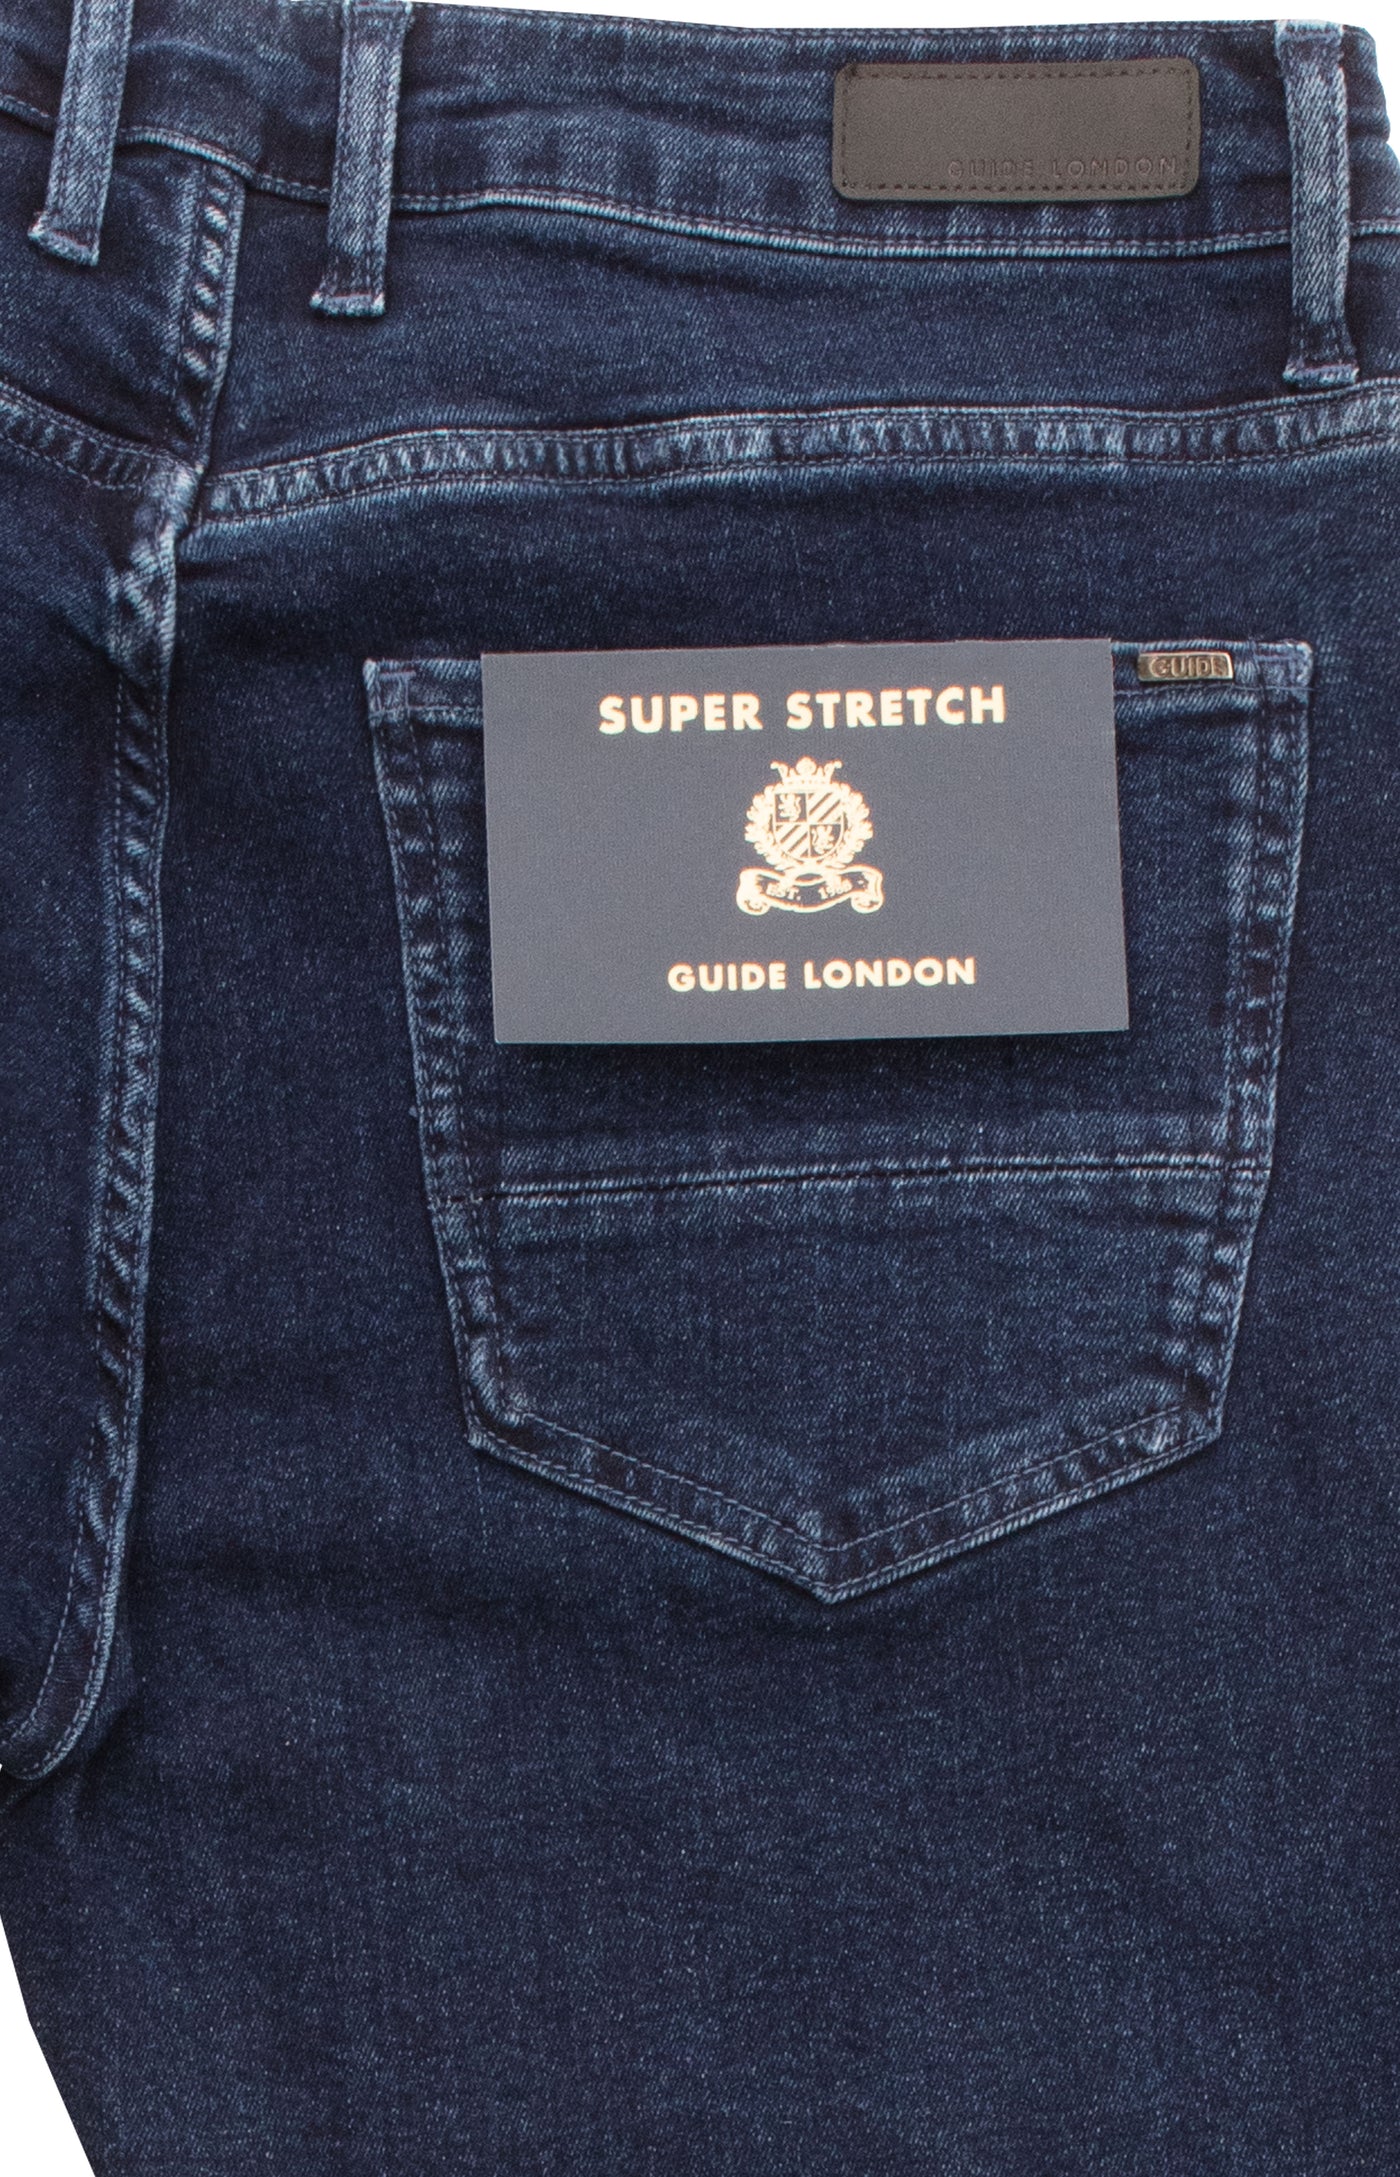 Indigo Stretch Jeans: Comfort and Style Combined